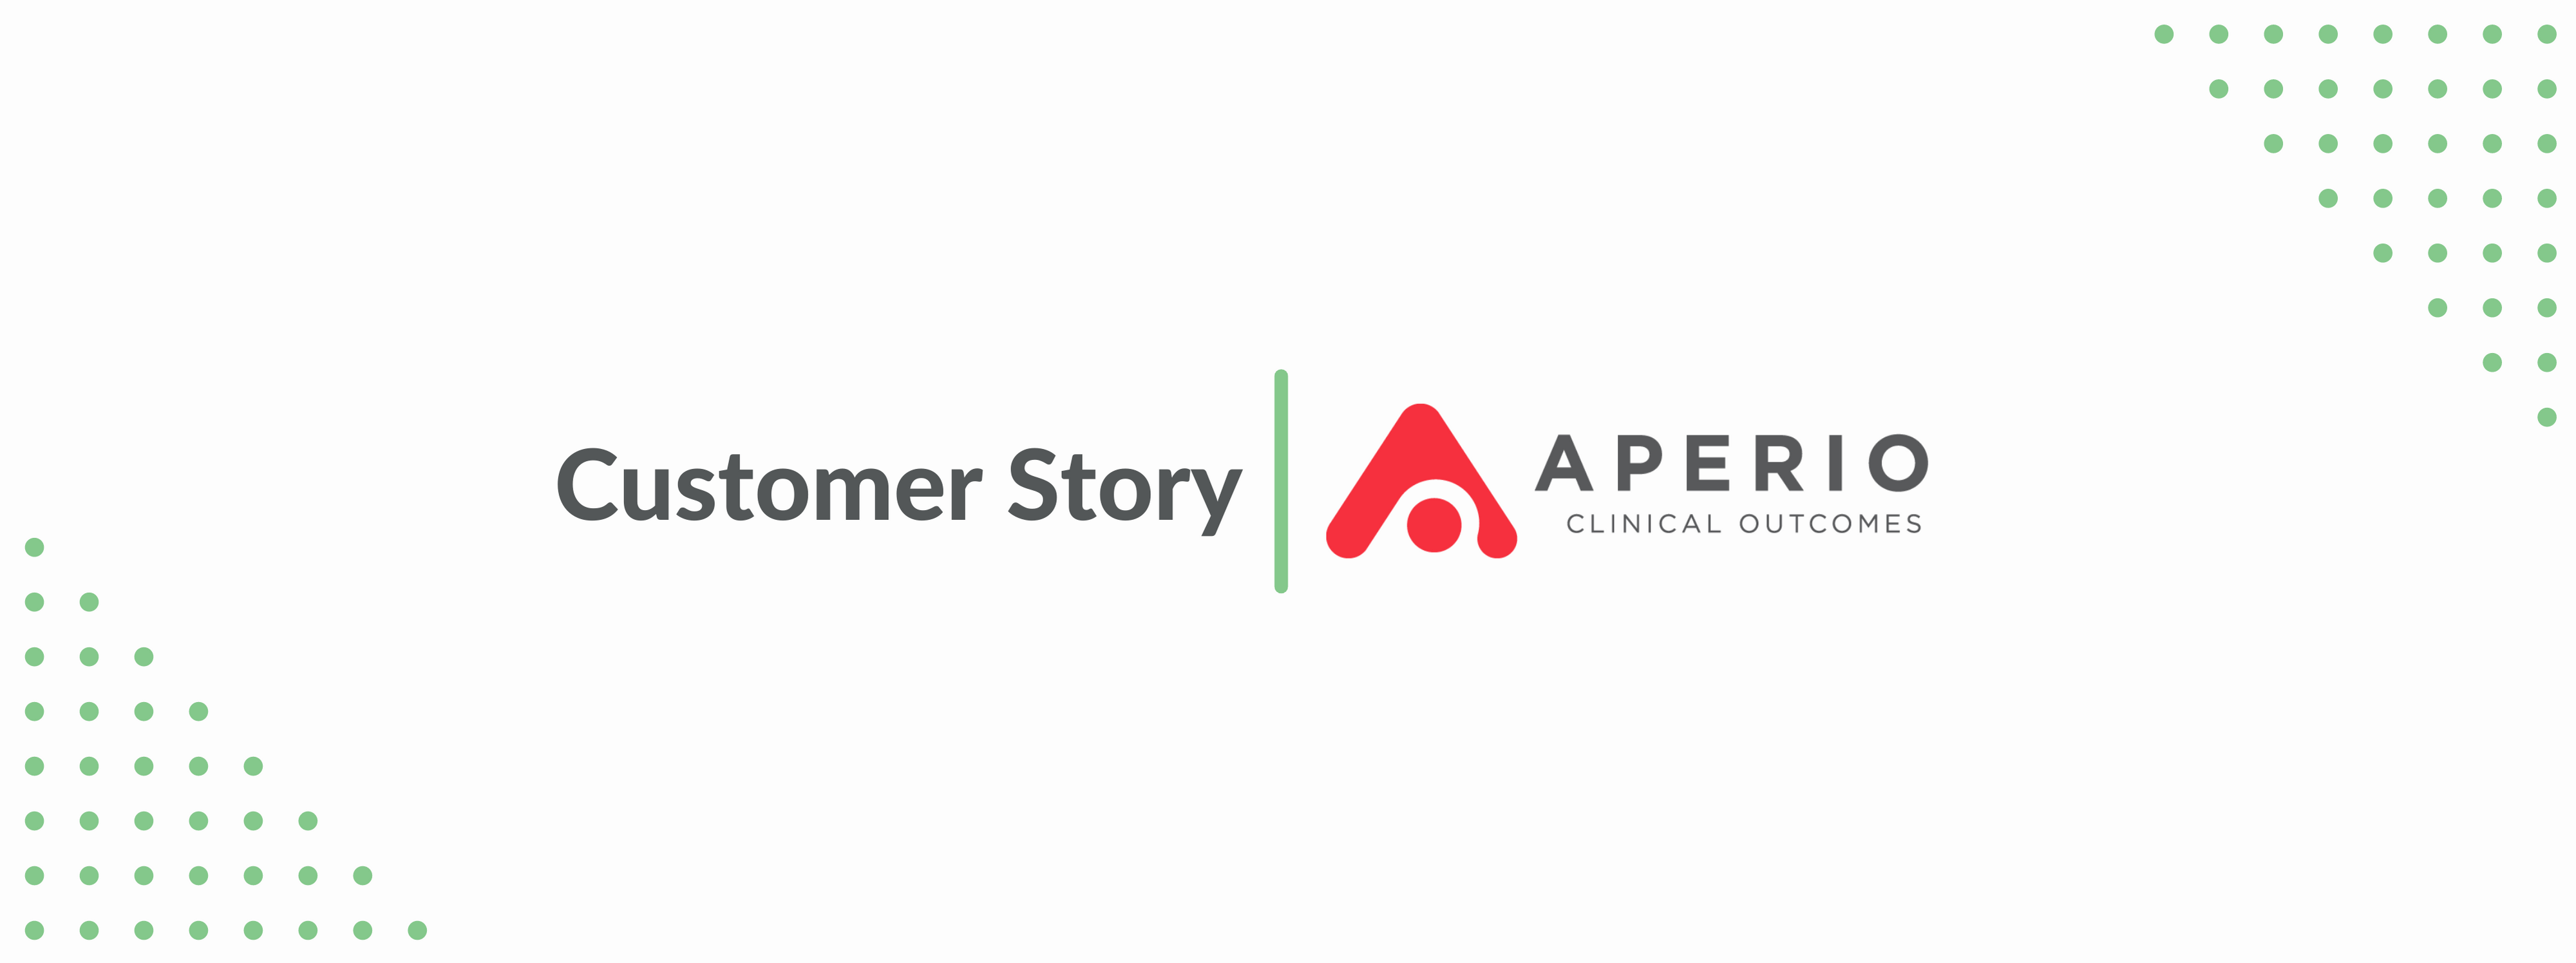 ZenQMS Makes it Easy for Aperio to  Implement at Its Own Pace